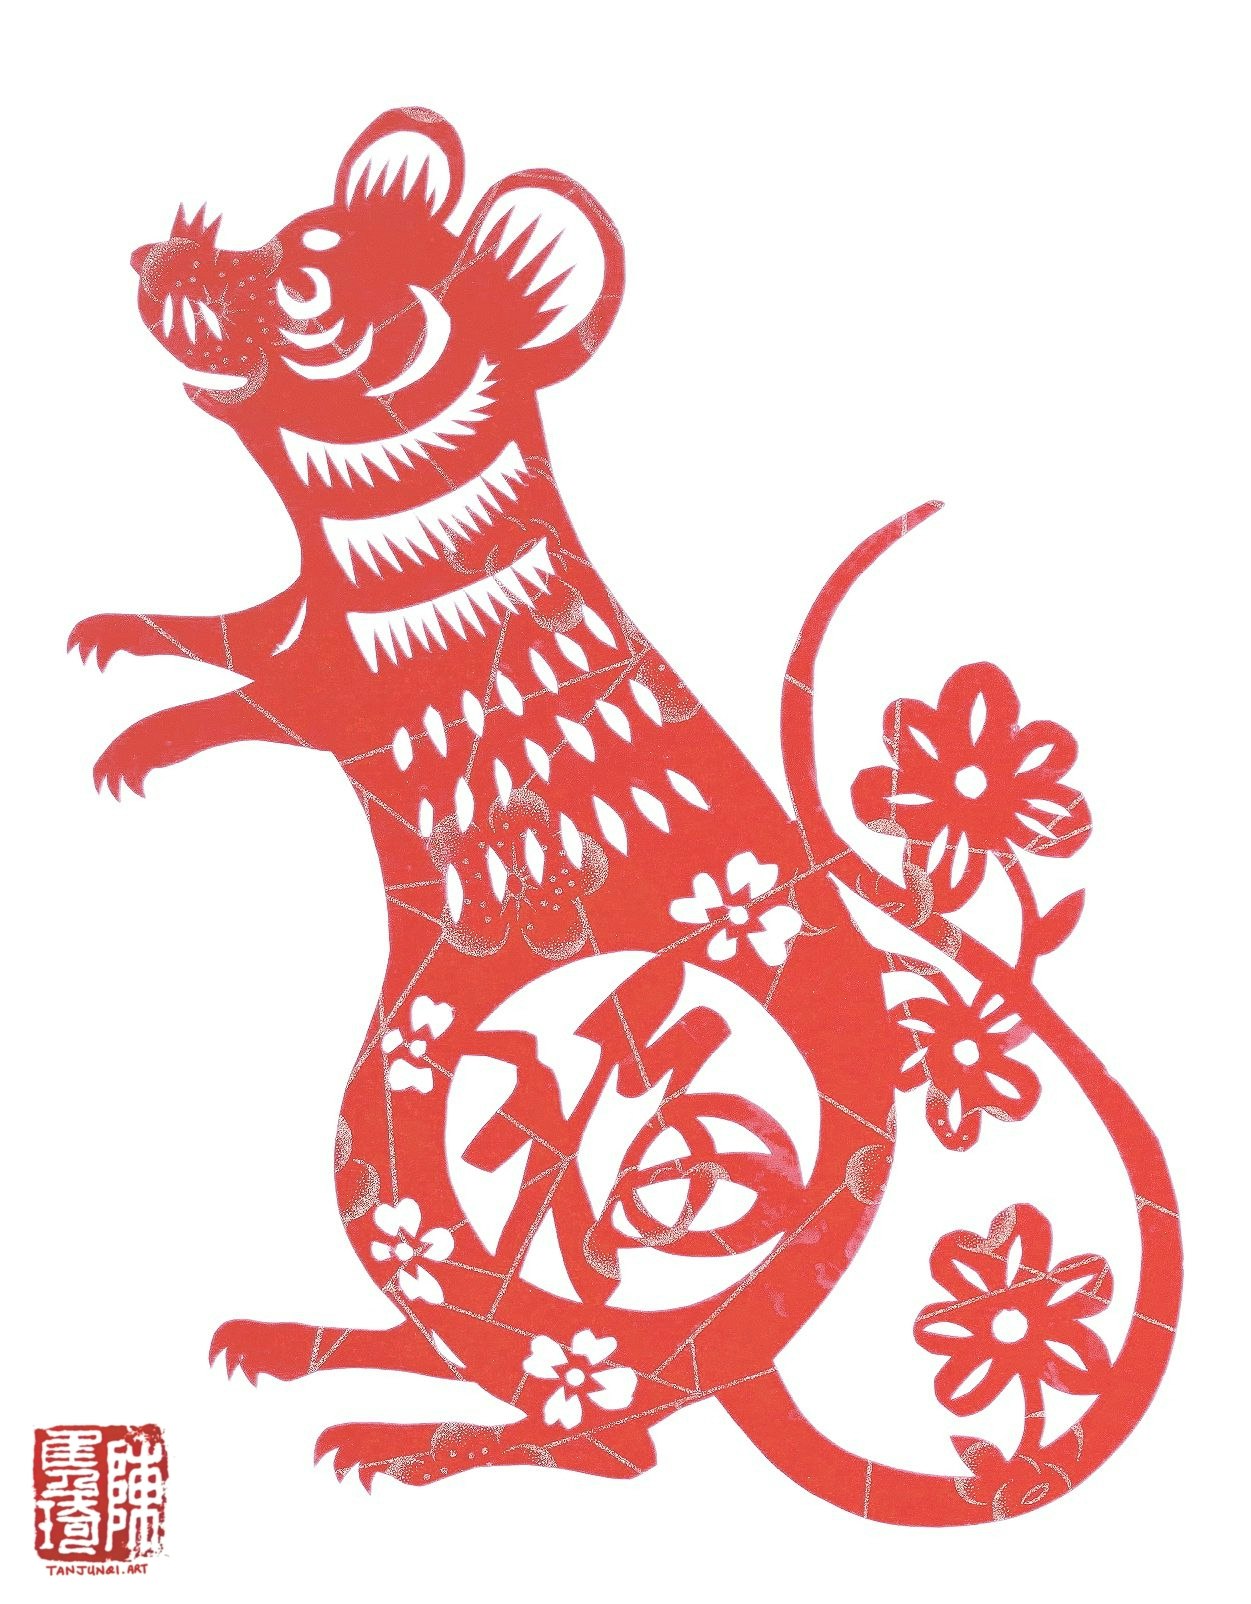 Chiense papercut of a rat sitting on its haunches, forepaws raised as if looking up at something, with the Chinese word for 'prosperity' on its thigh, and flower motifs around.